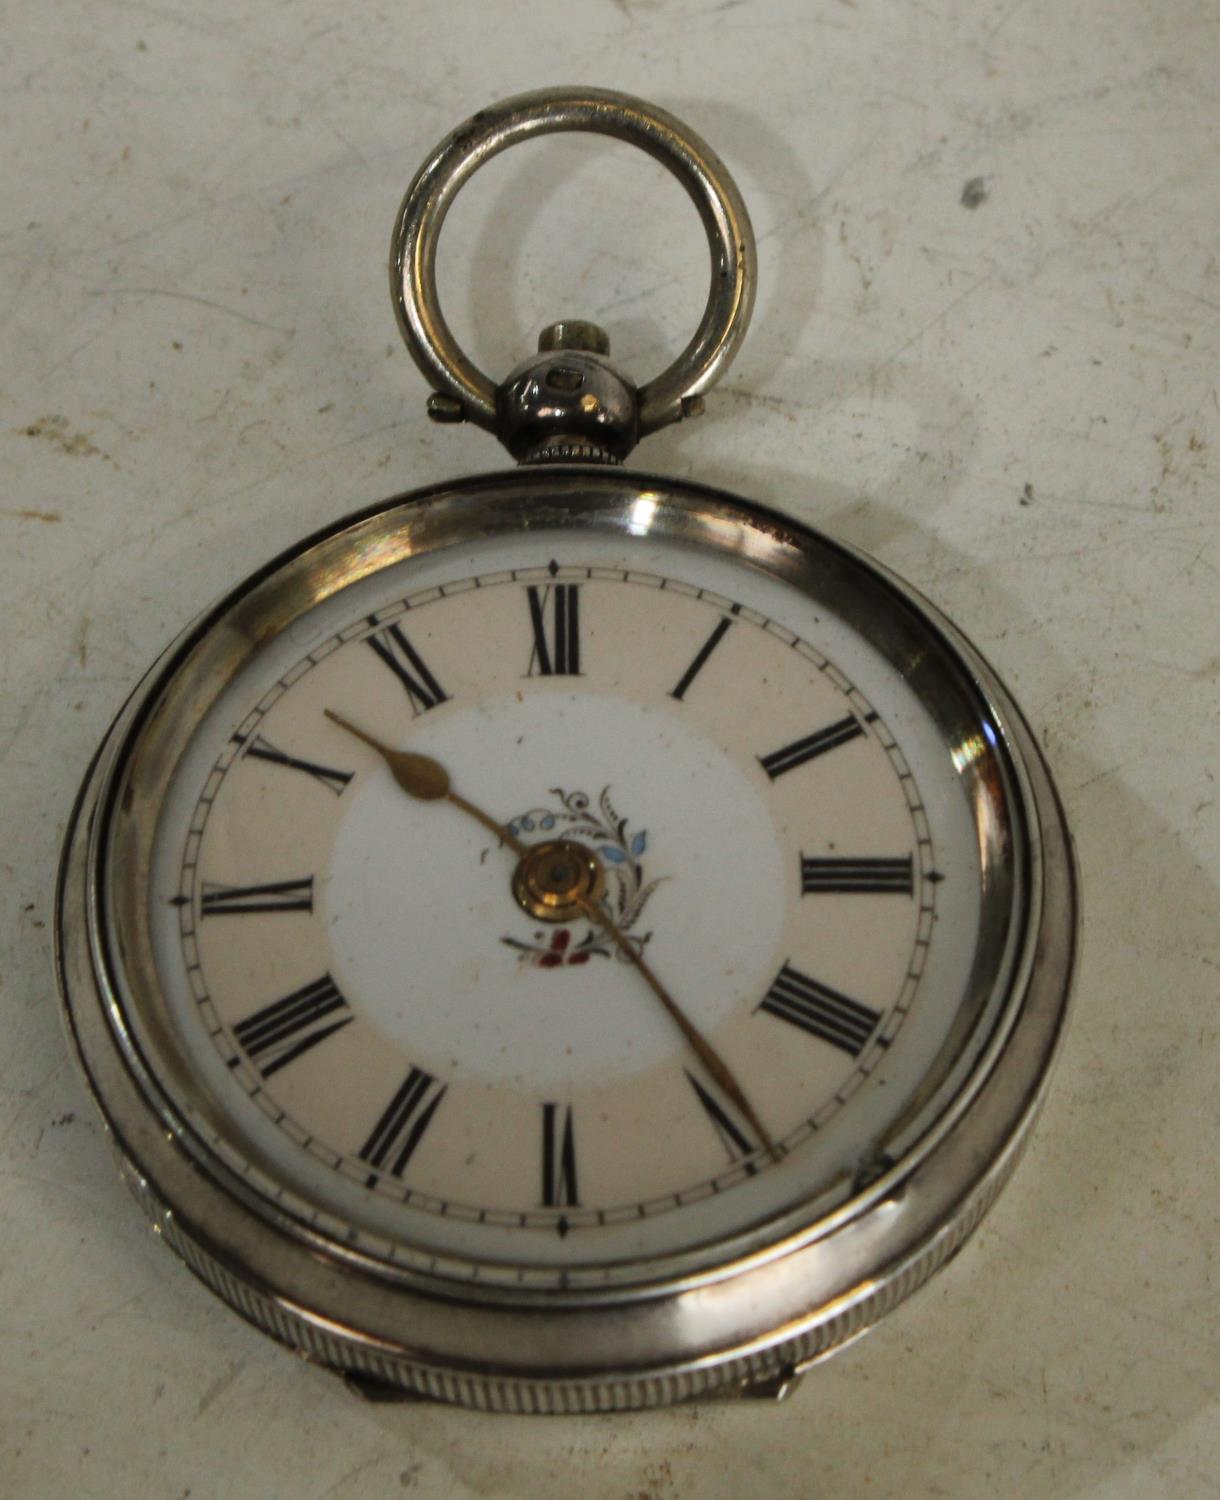 A late 19th century Swiss silver fob watch, c. - Image 2 of 2